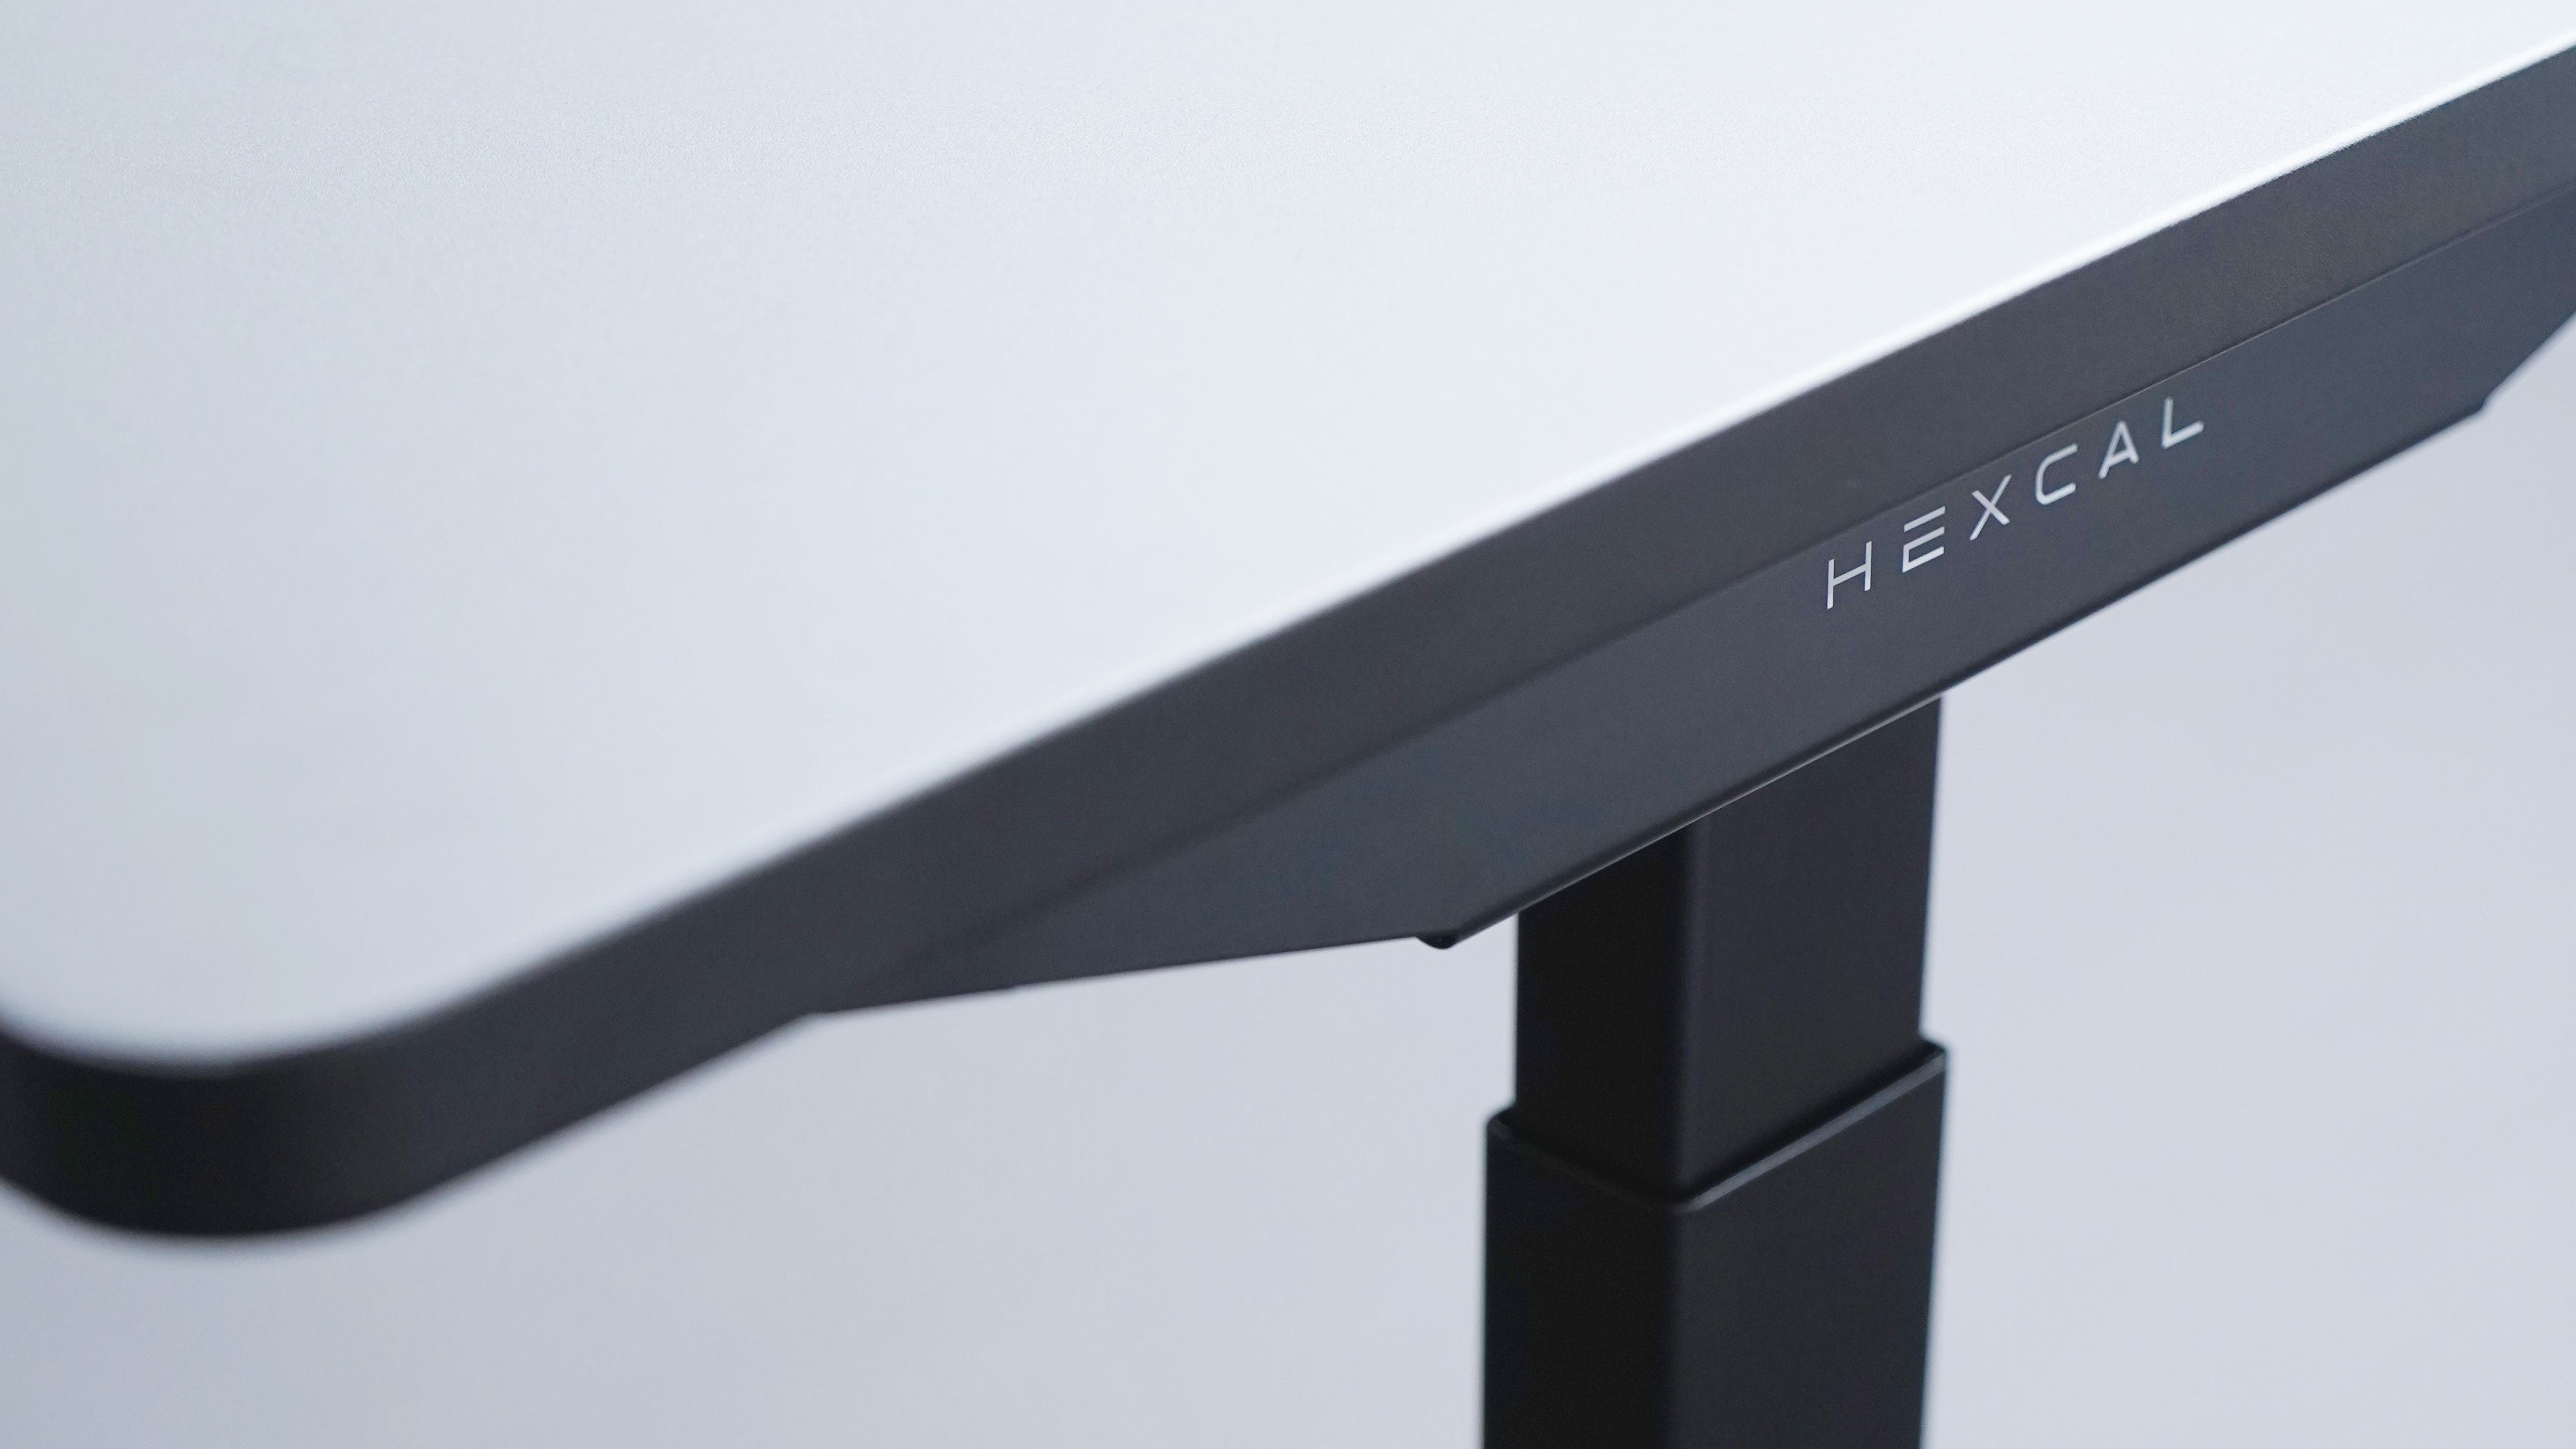 Defining a Premium Standing Desk: The Hexcal Elevate Standing Desk